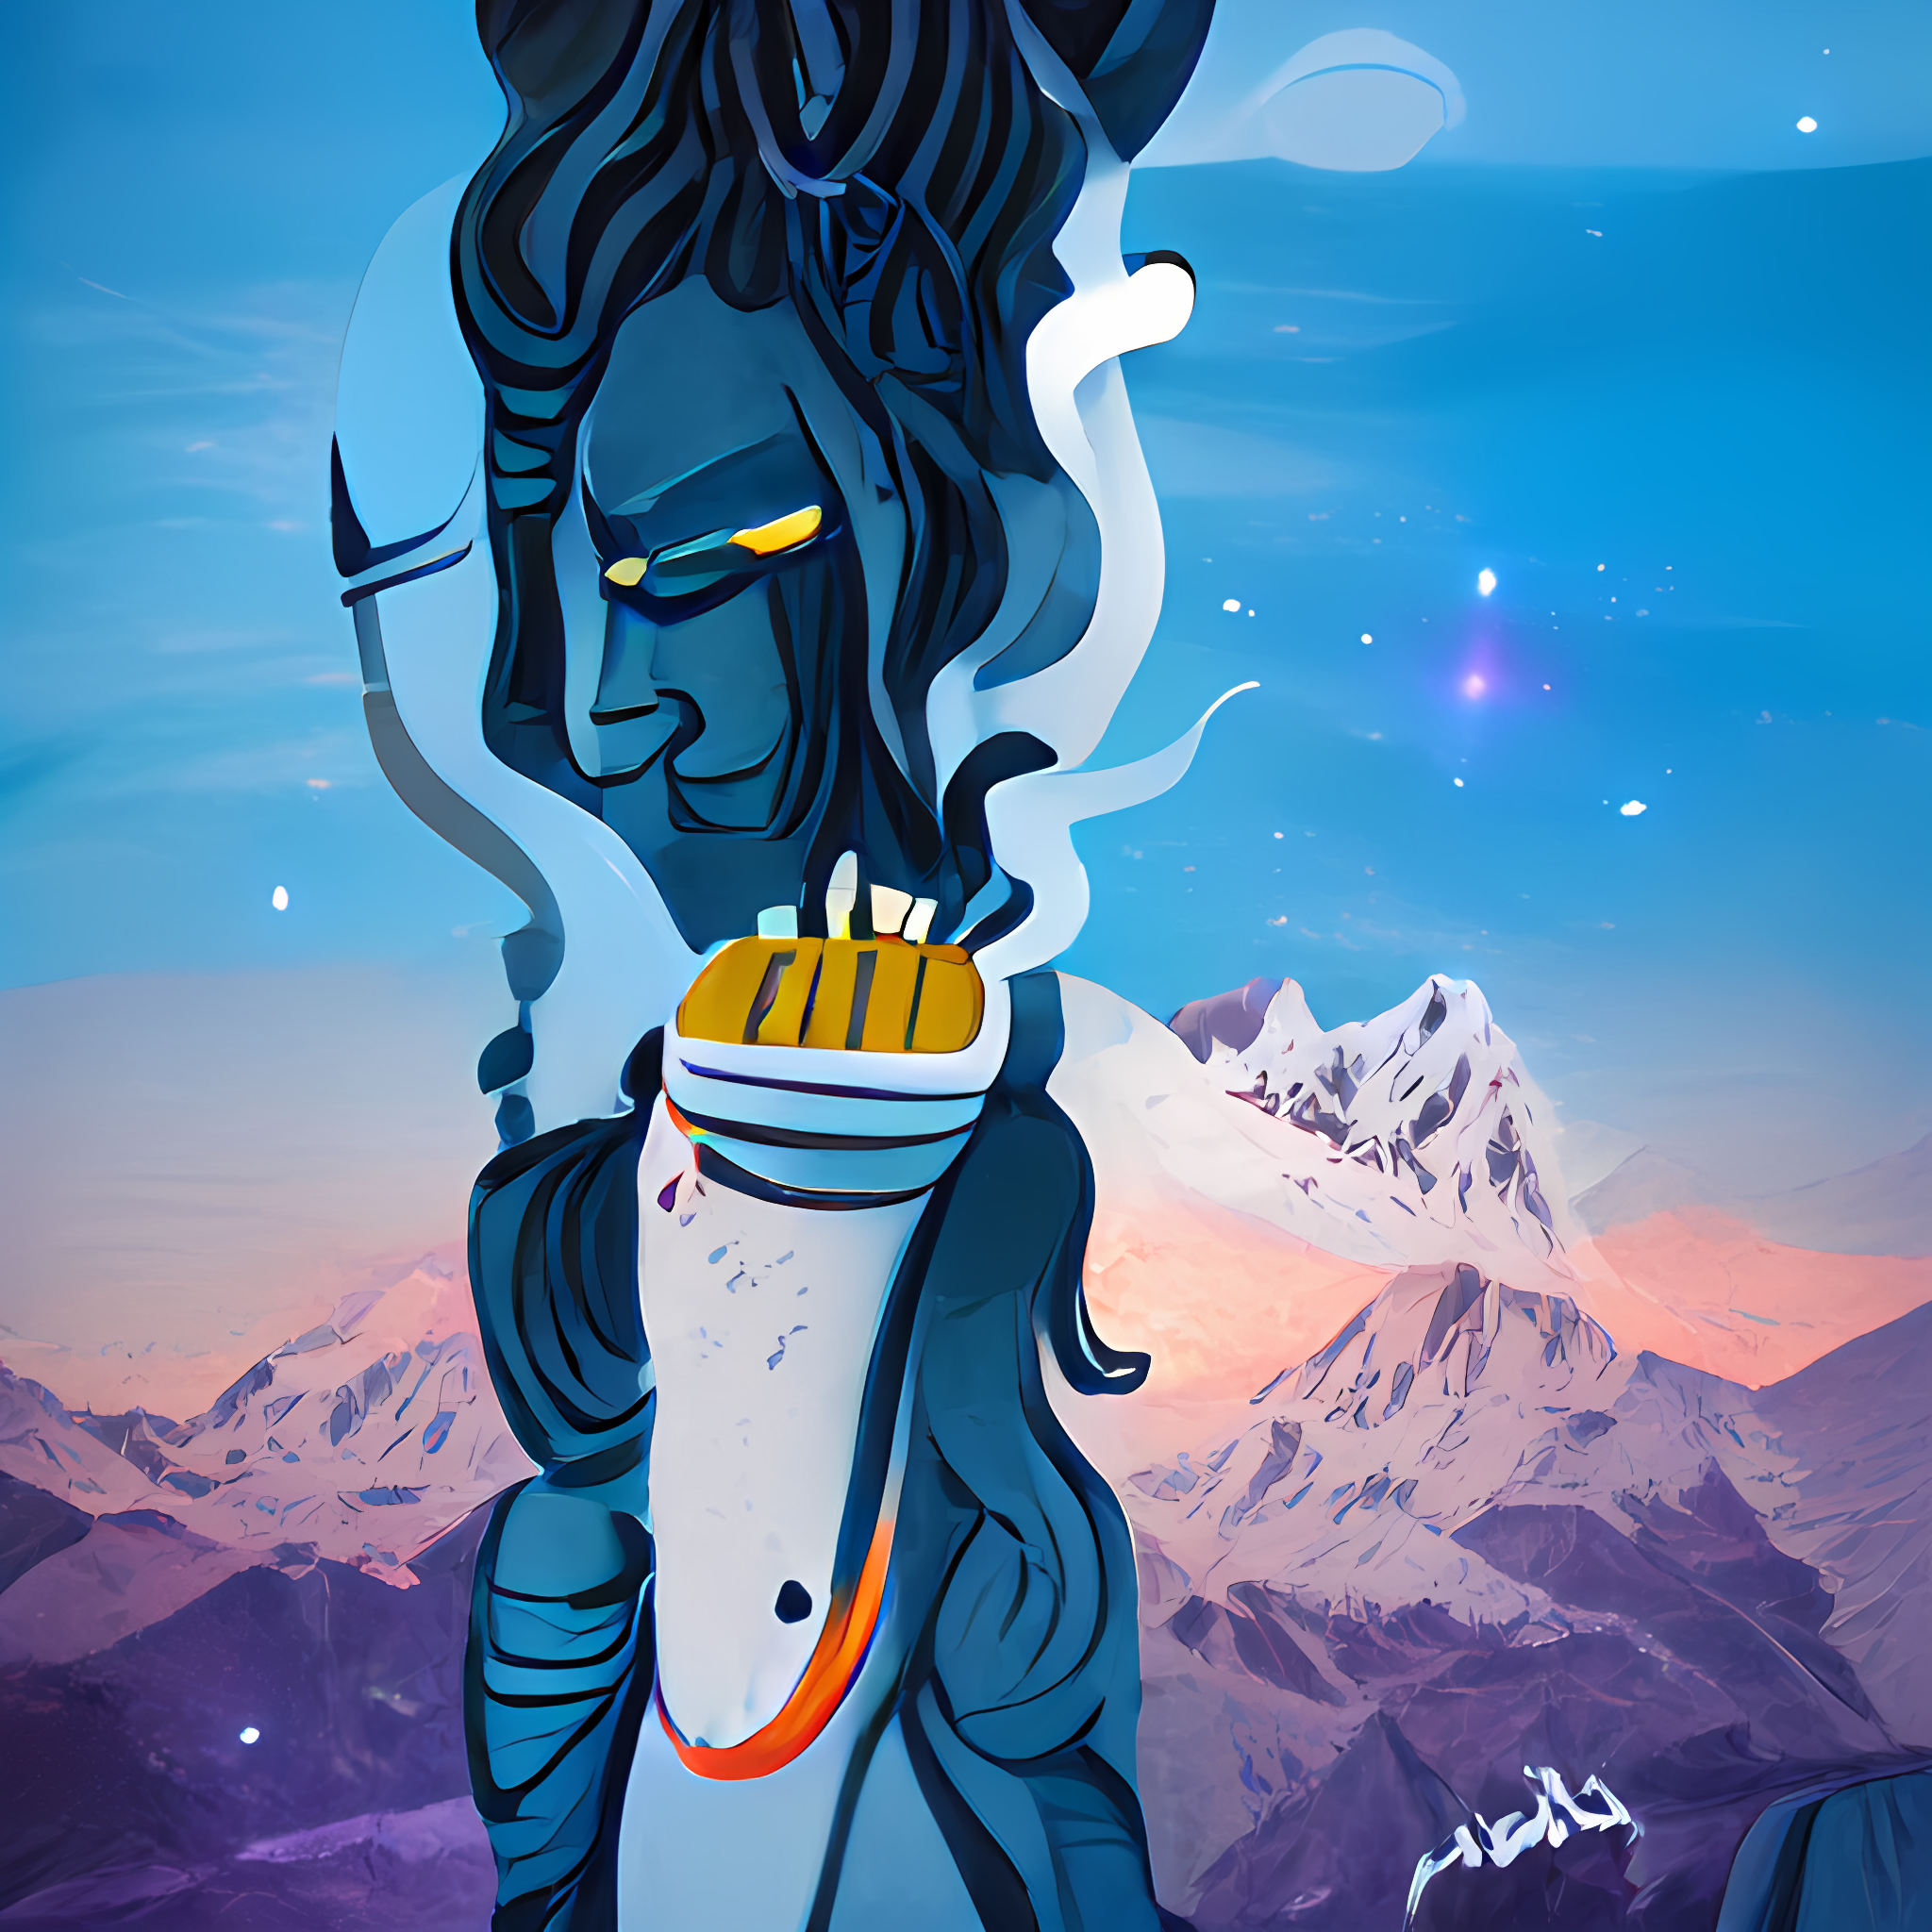 The experience of Shiva - THC Selects | OpenSea